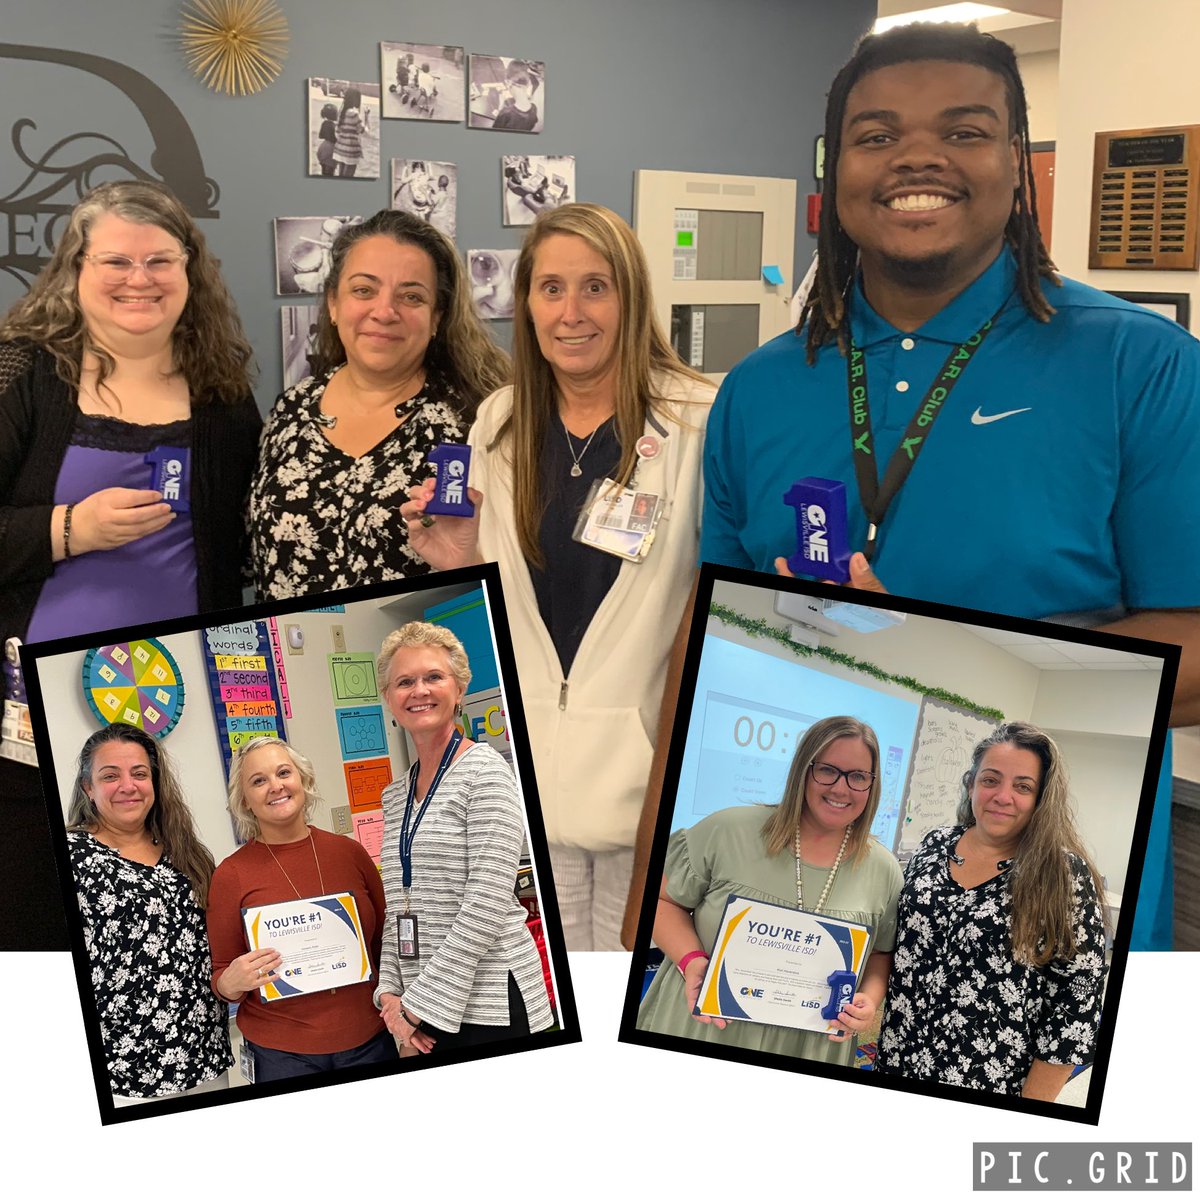 Had a great time celebrating these super All-Star 🌟employees ⁦@DeganElementary⁩ with Principal ⁦@AndreaNSmith111⁩! Gotta ❤️ the smiles on their faces! Thank you for your awesome service! ⁦@LewisvilleISD⁩ from ⁦@LISD_HR⁩ #OneLISD ⁦@SheliaKSmith⁩